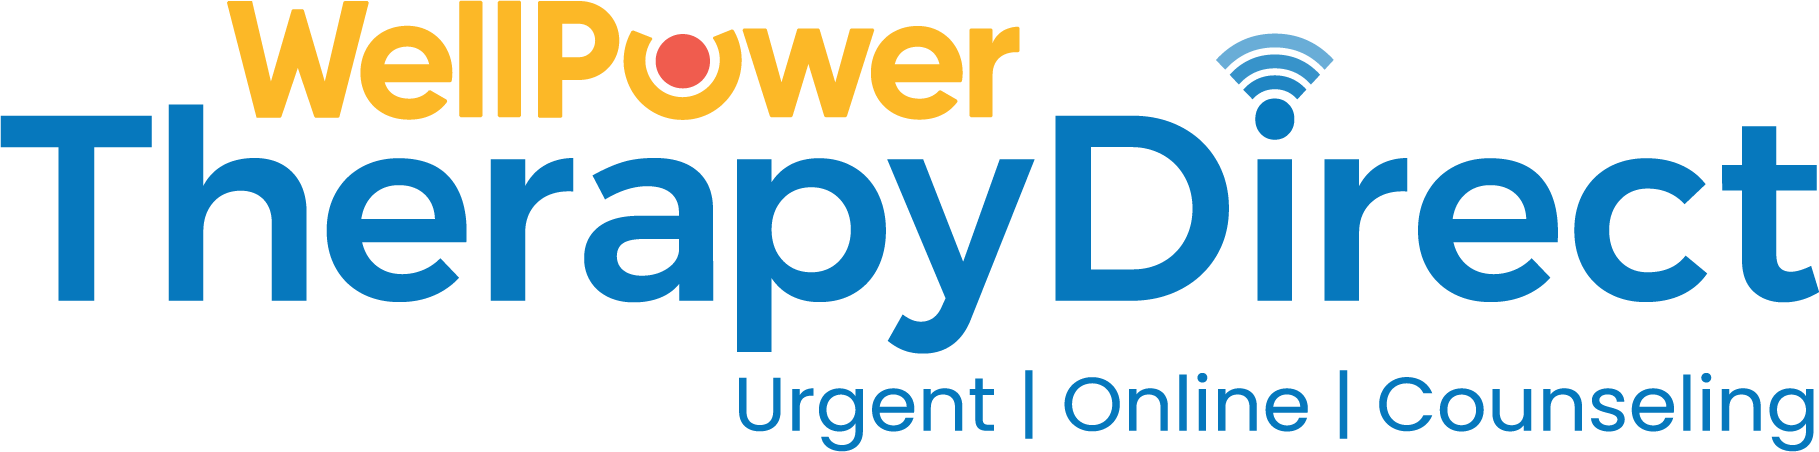 TherapyDirect_WellPower_logo-TAG_final